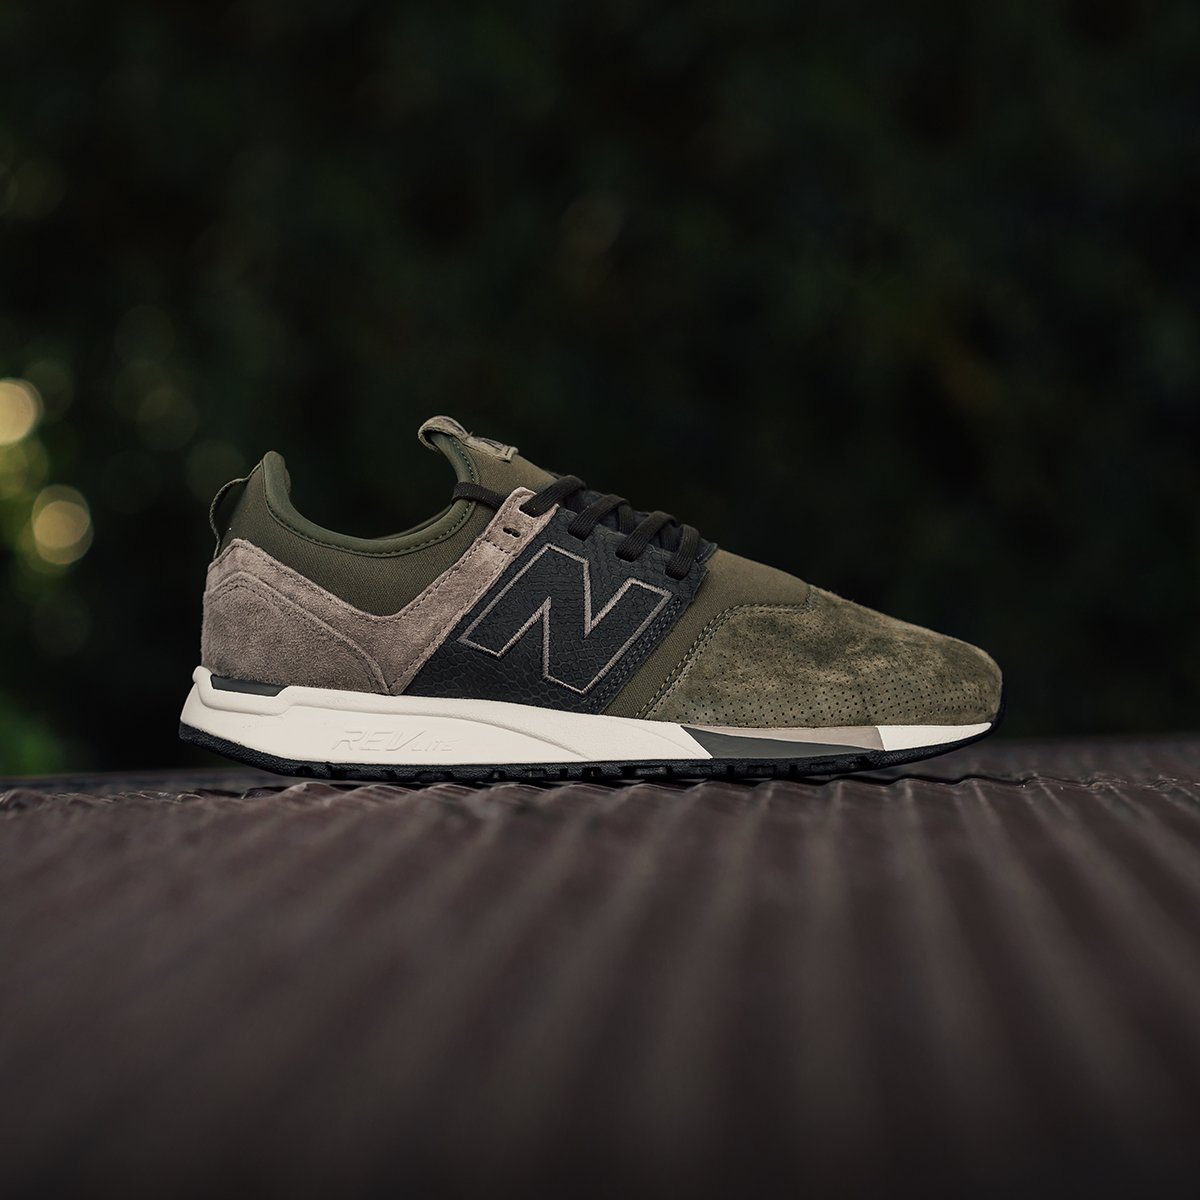 New Balance 247 Luxe “Reptile” // Available Now